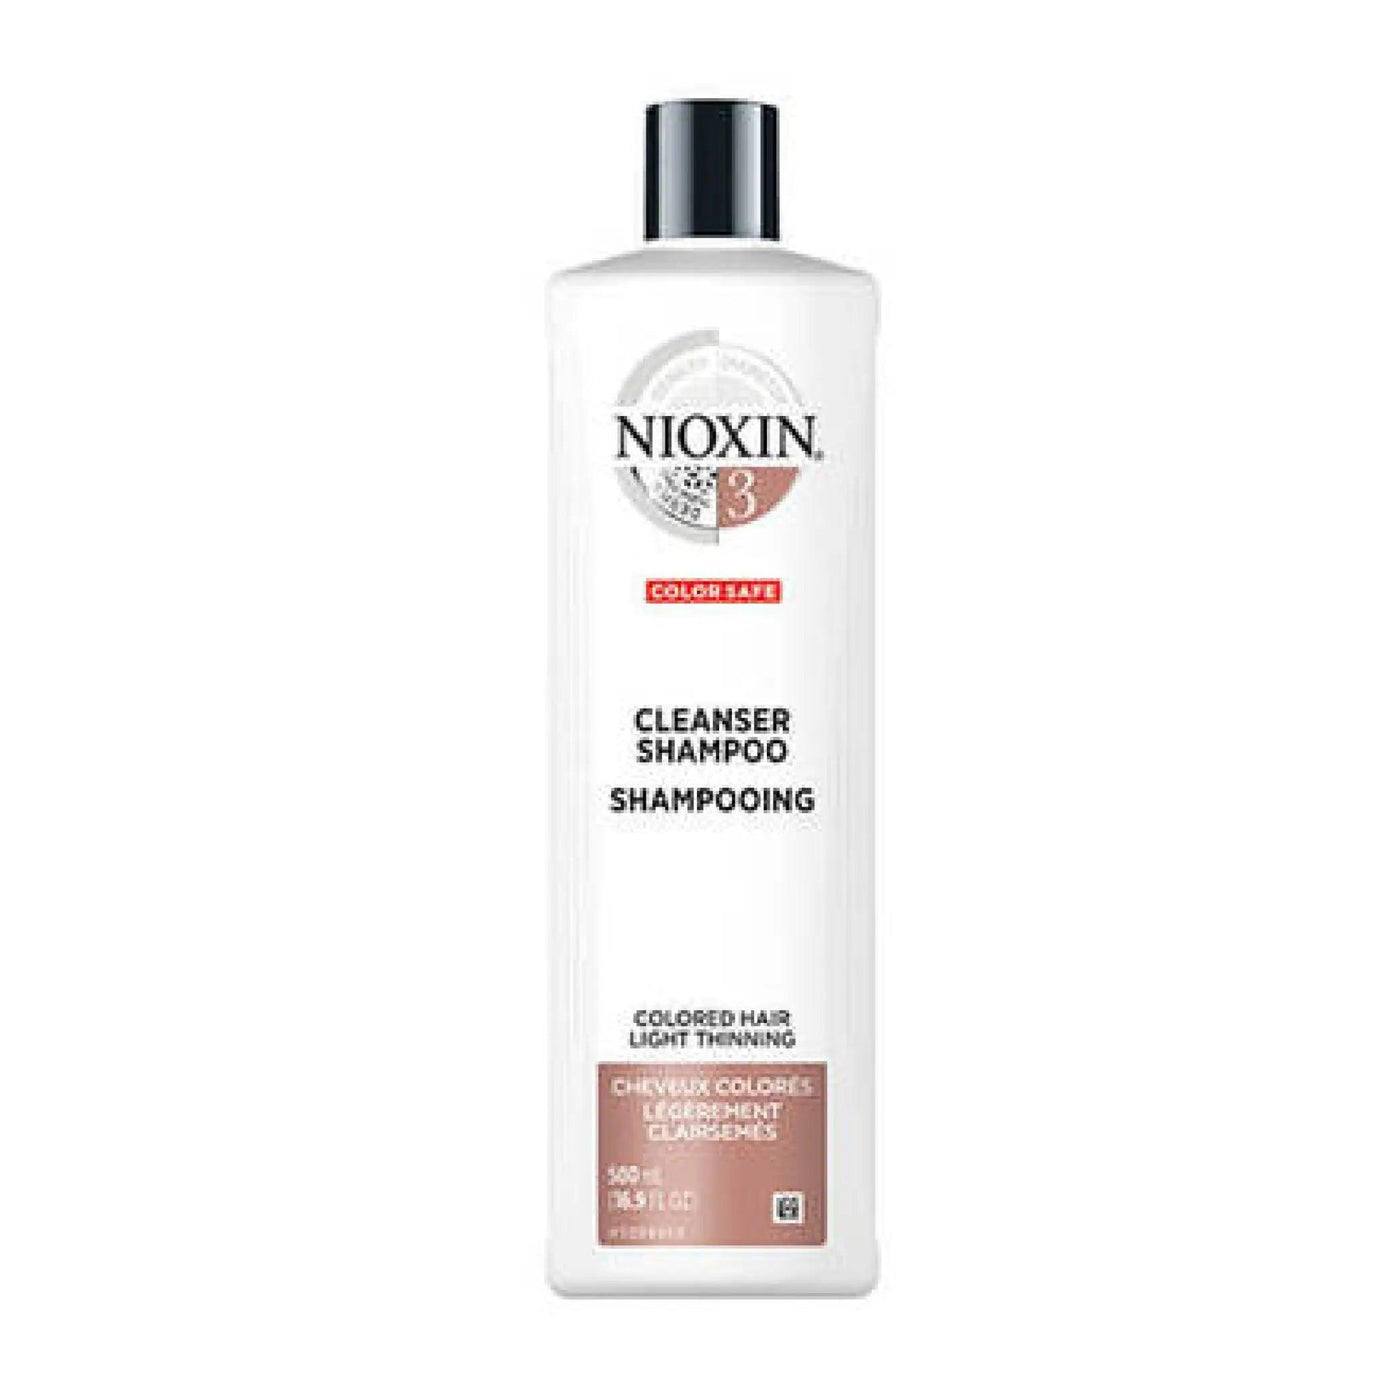 System 3 Cleanser Shampoo Nioxin Boutique Deauville